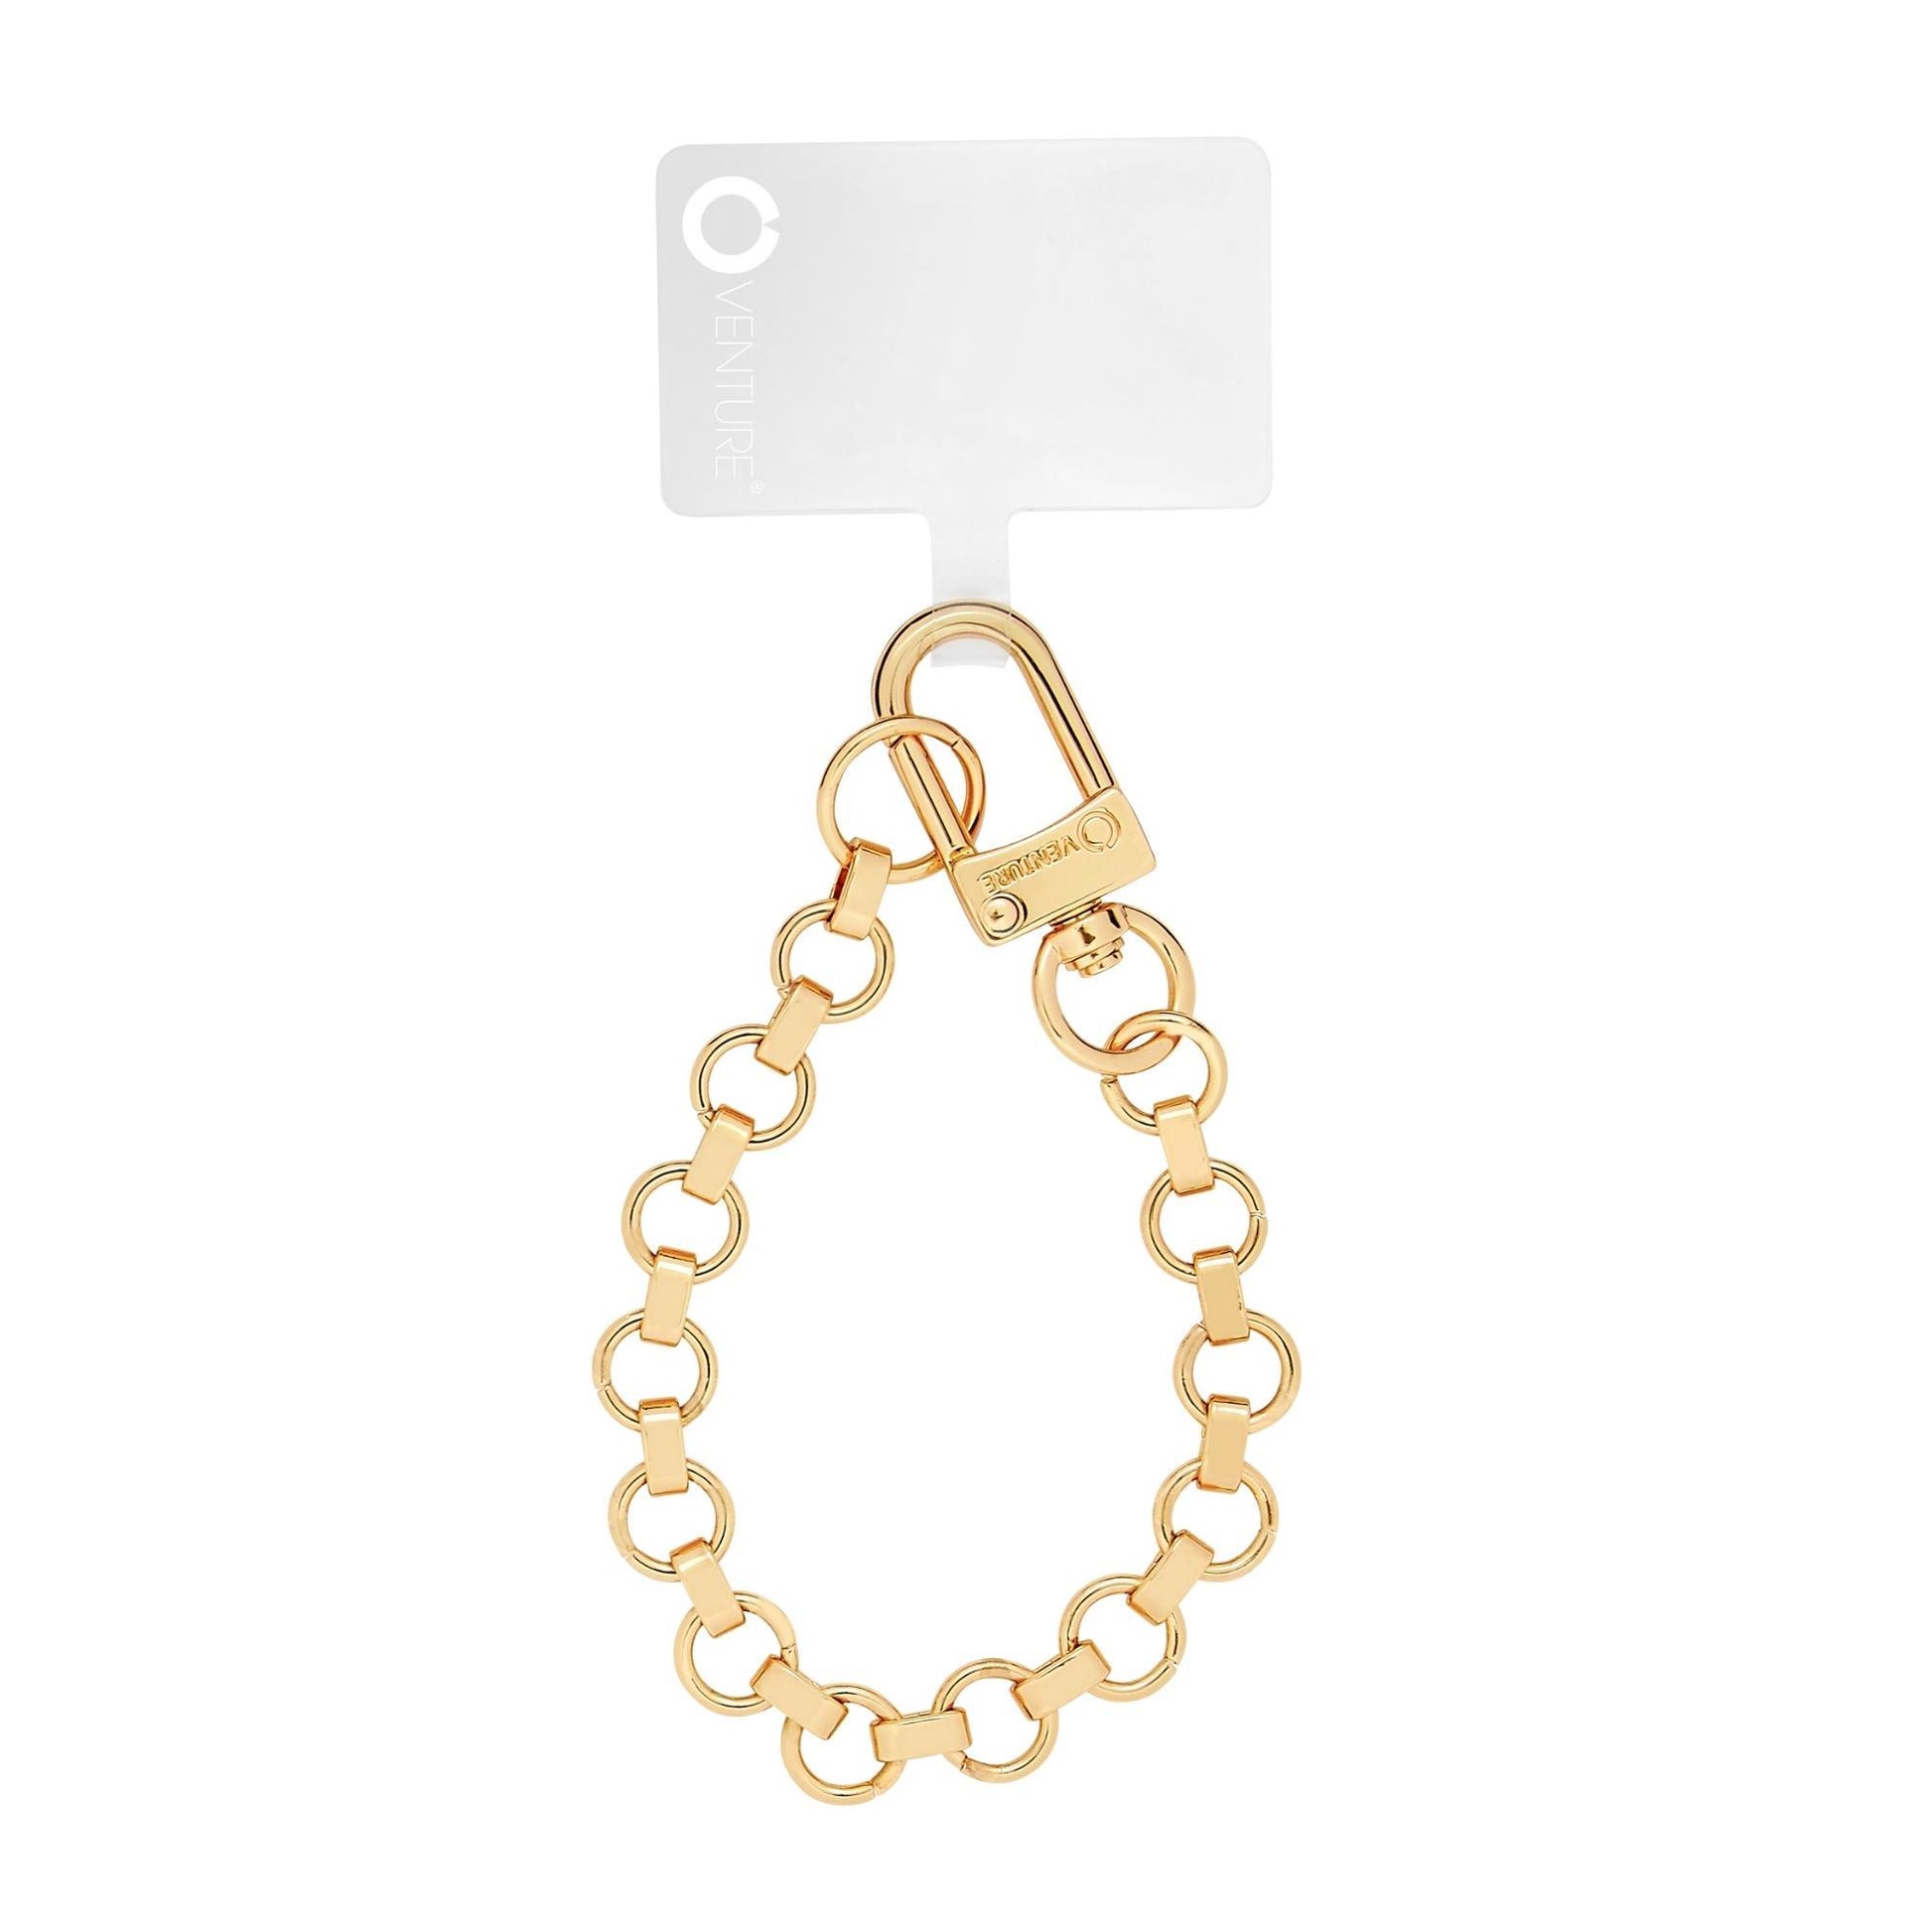 Gold Rush - The Hook Me Up™ Wristlet - Oventure shown in gold link chain with hook me up phone tab attached